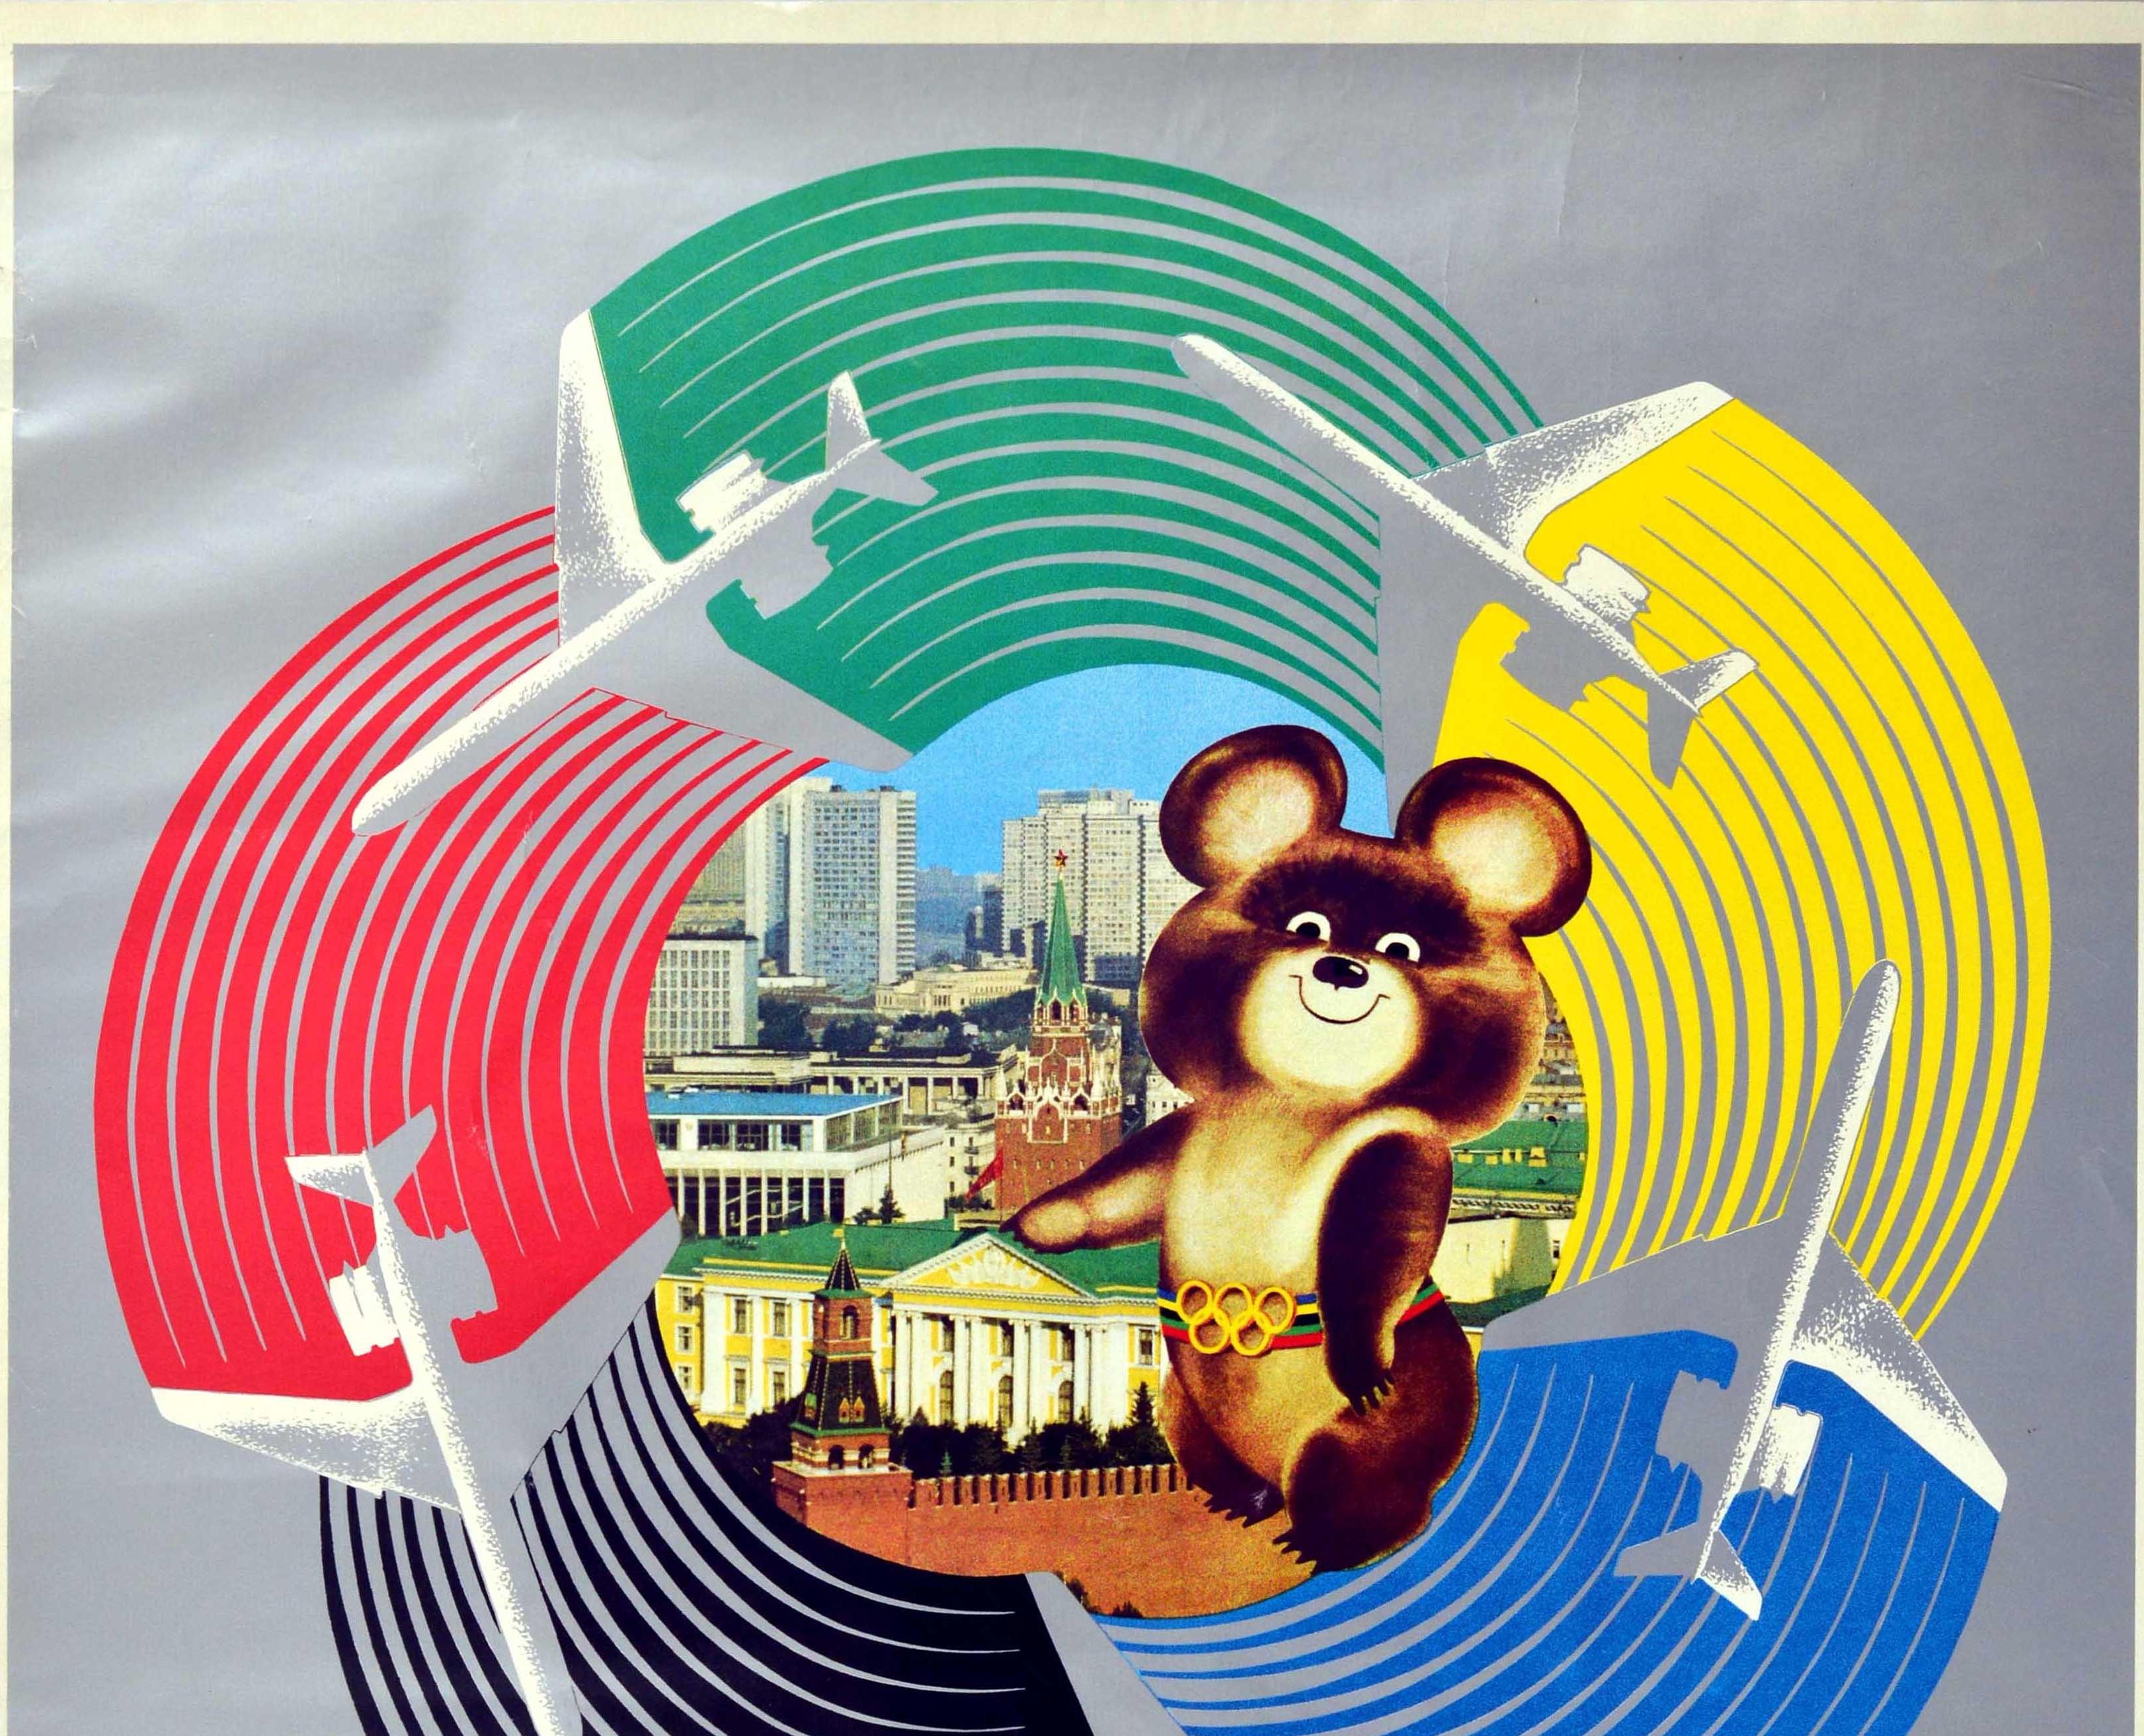 Original Vintage Poster Moscow Olympic Games Aeroflot Soviet Airlines Misha Bear - Print by K Rudov